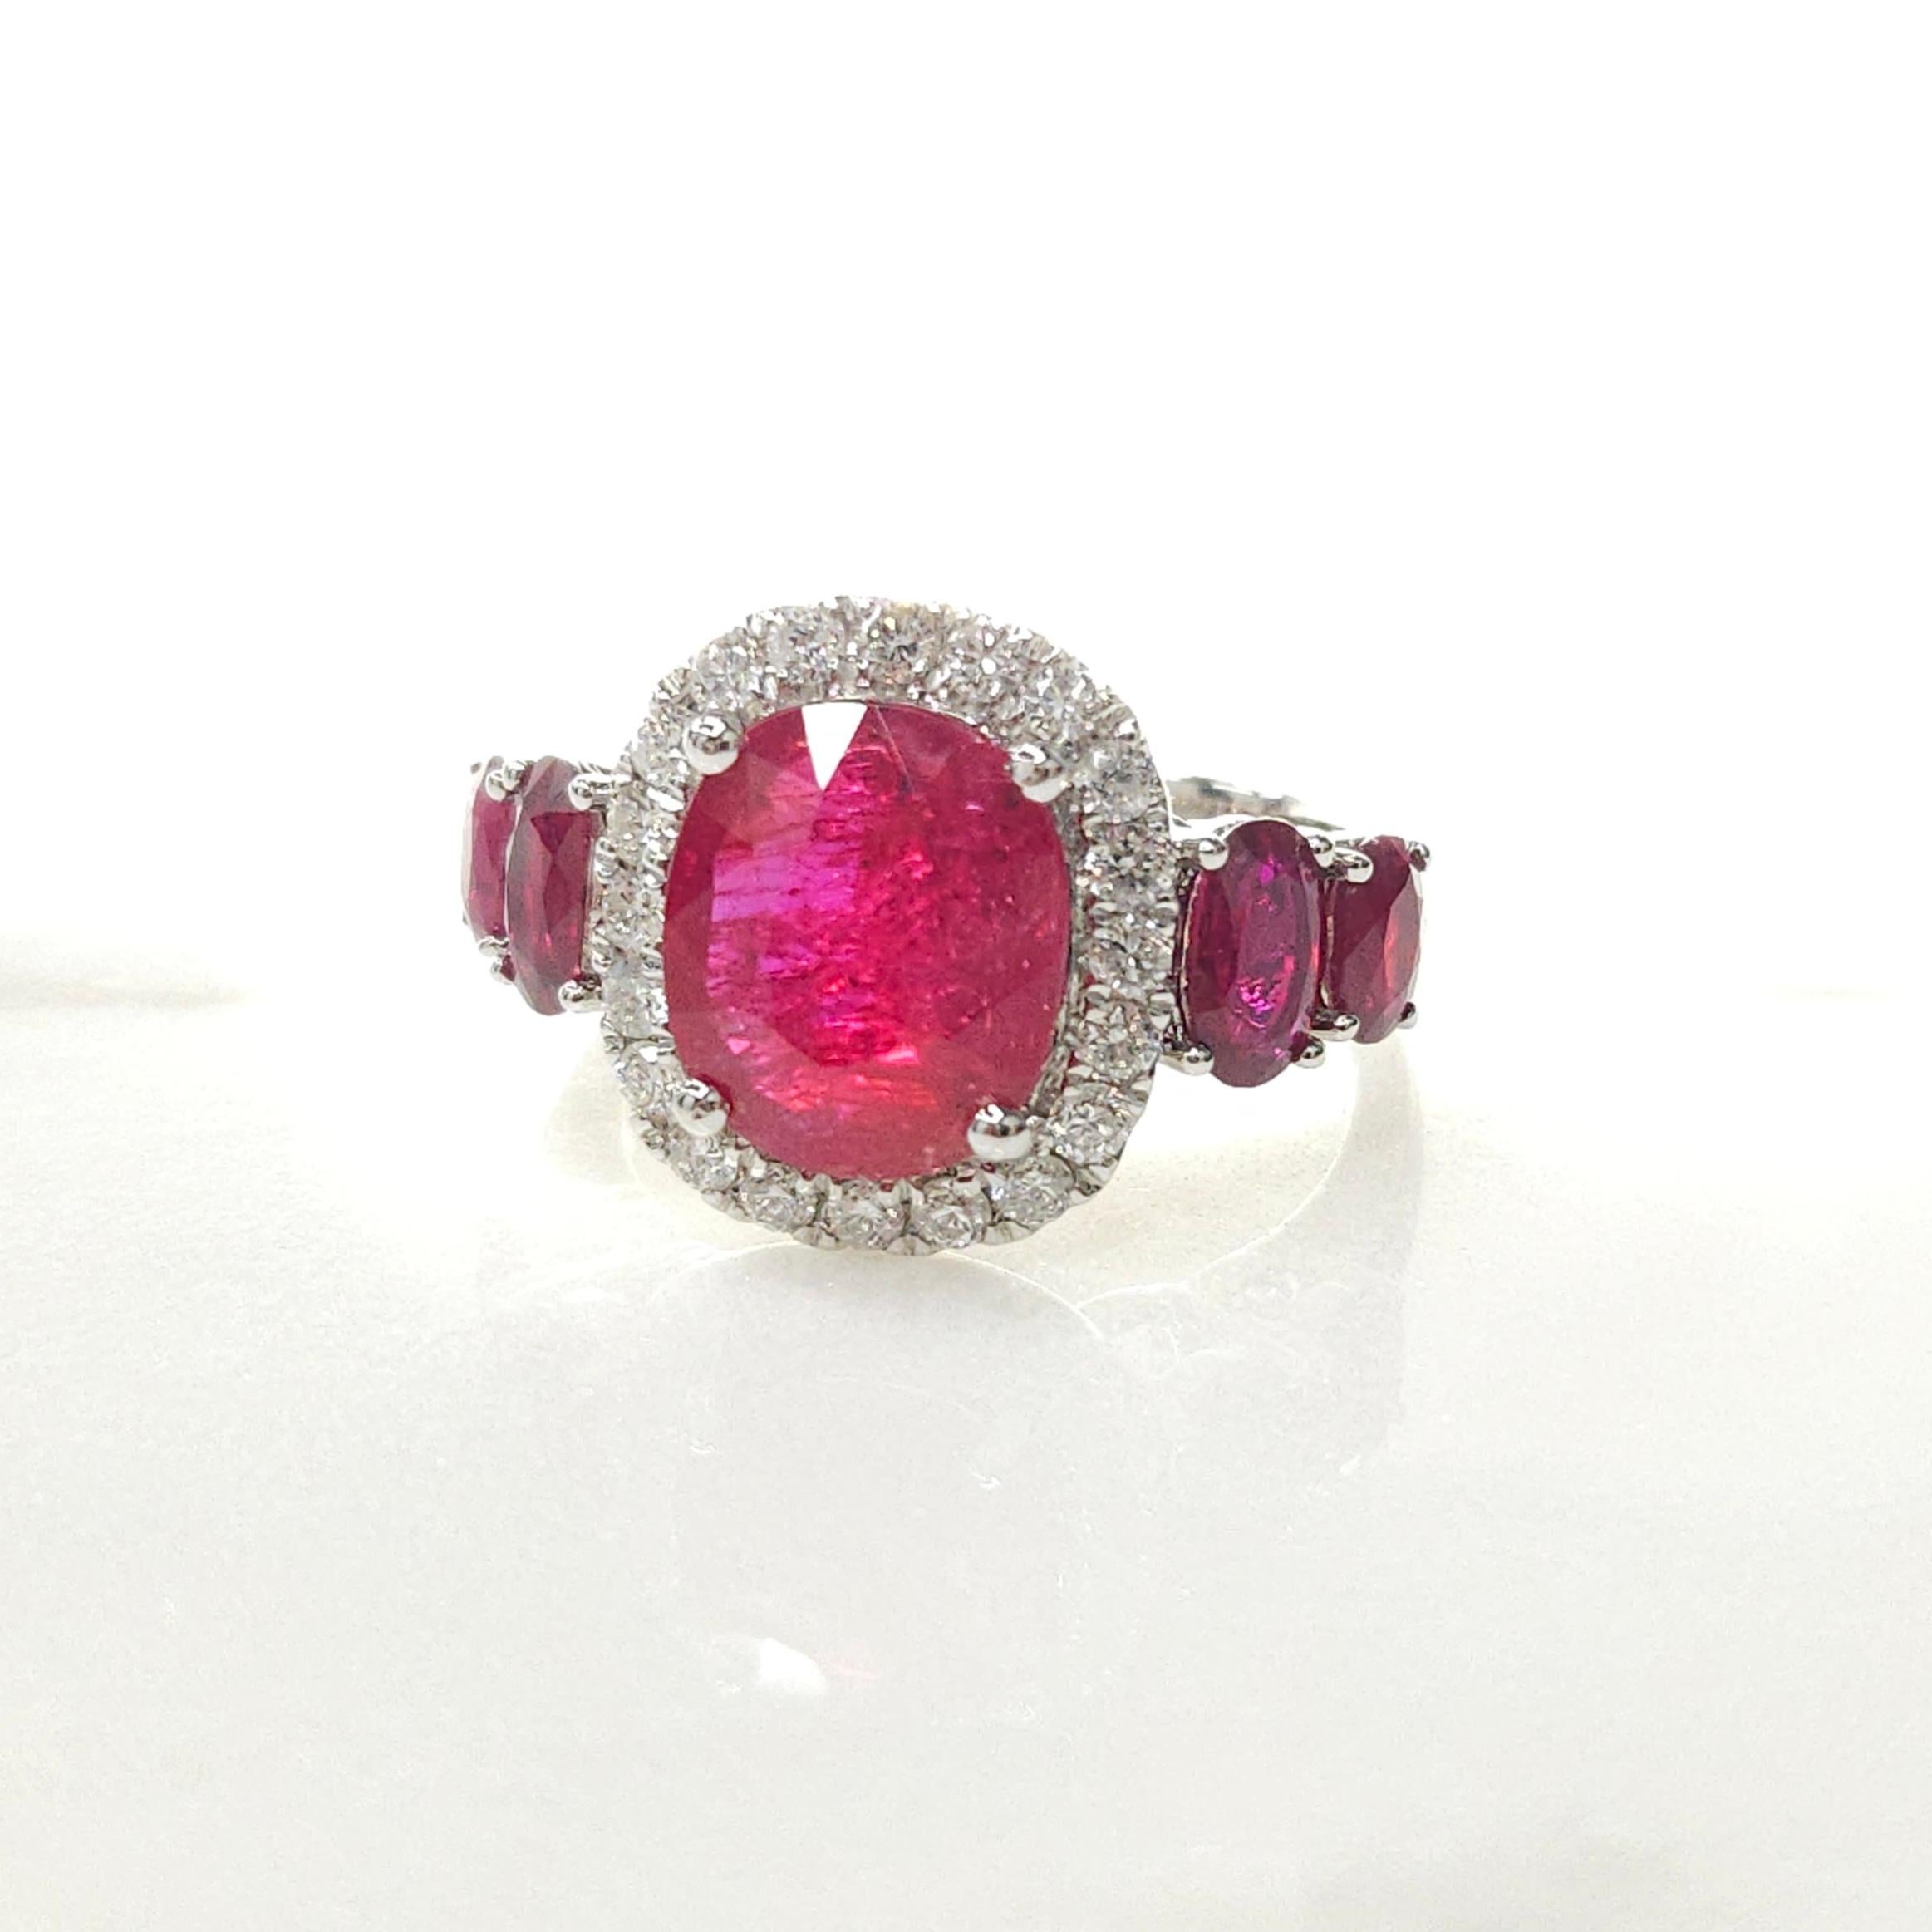 Oval Cut IGI Certified 4.00 Carat Ruby & Diamond Ring in 18K White Gold For Sale